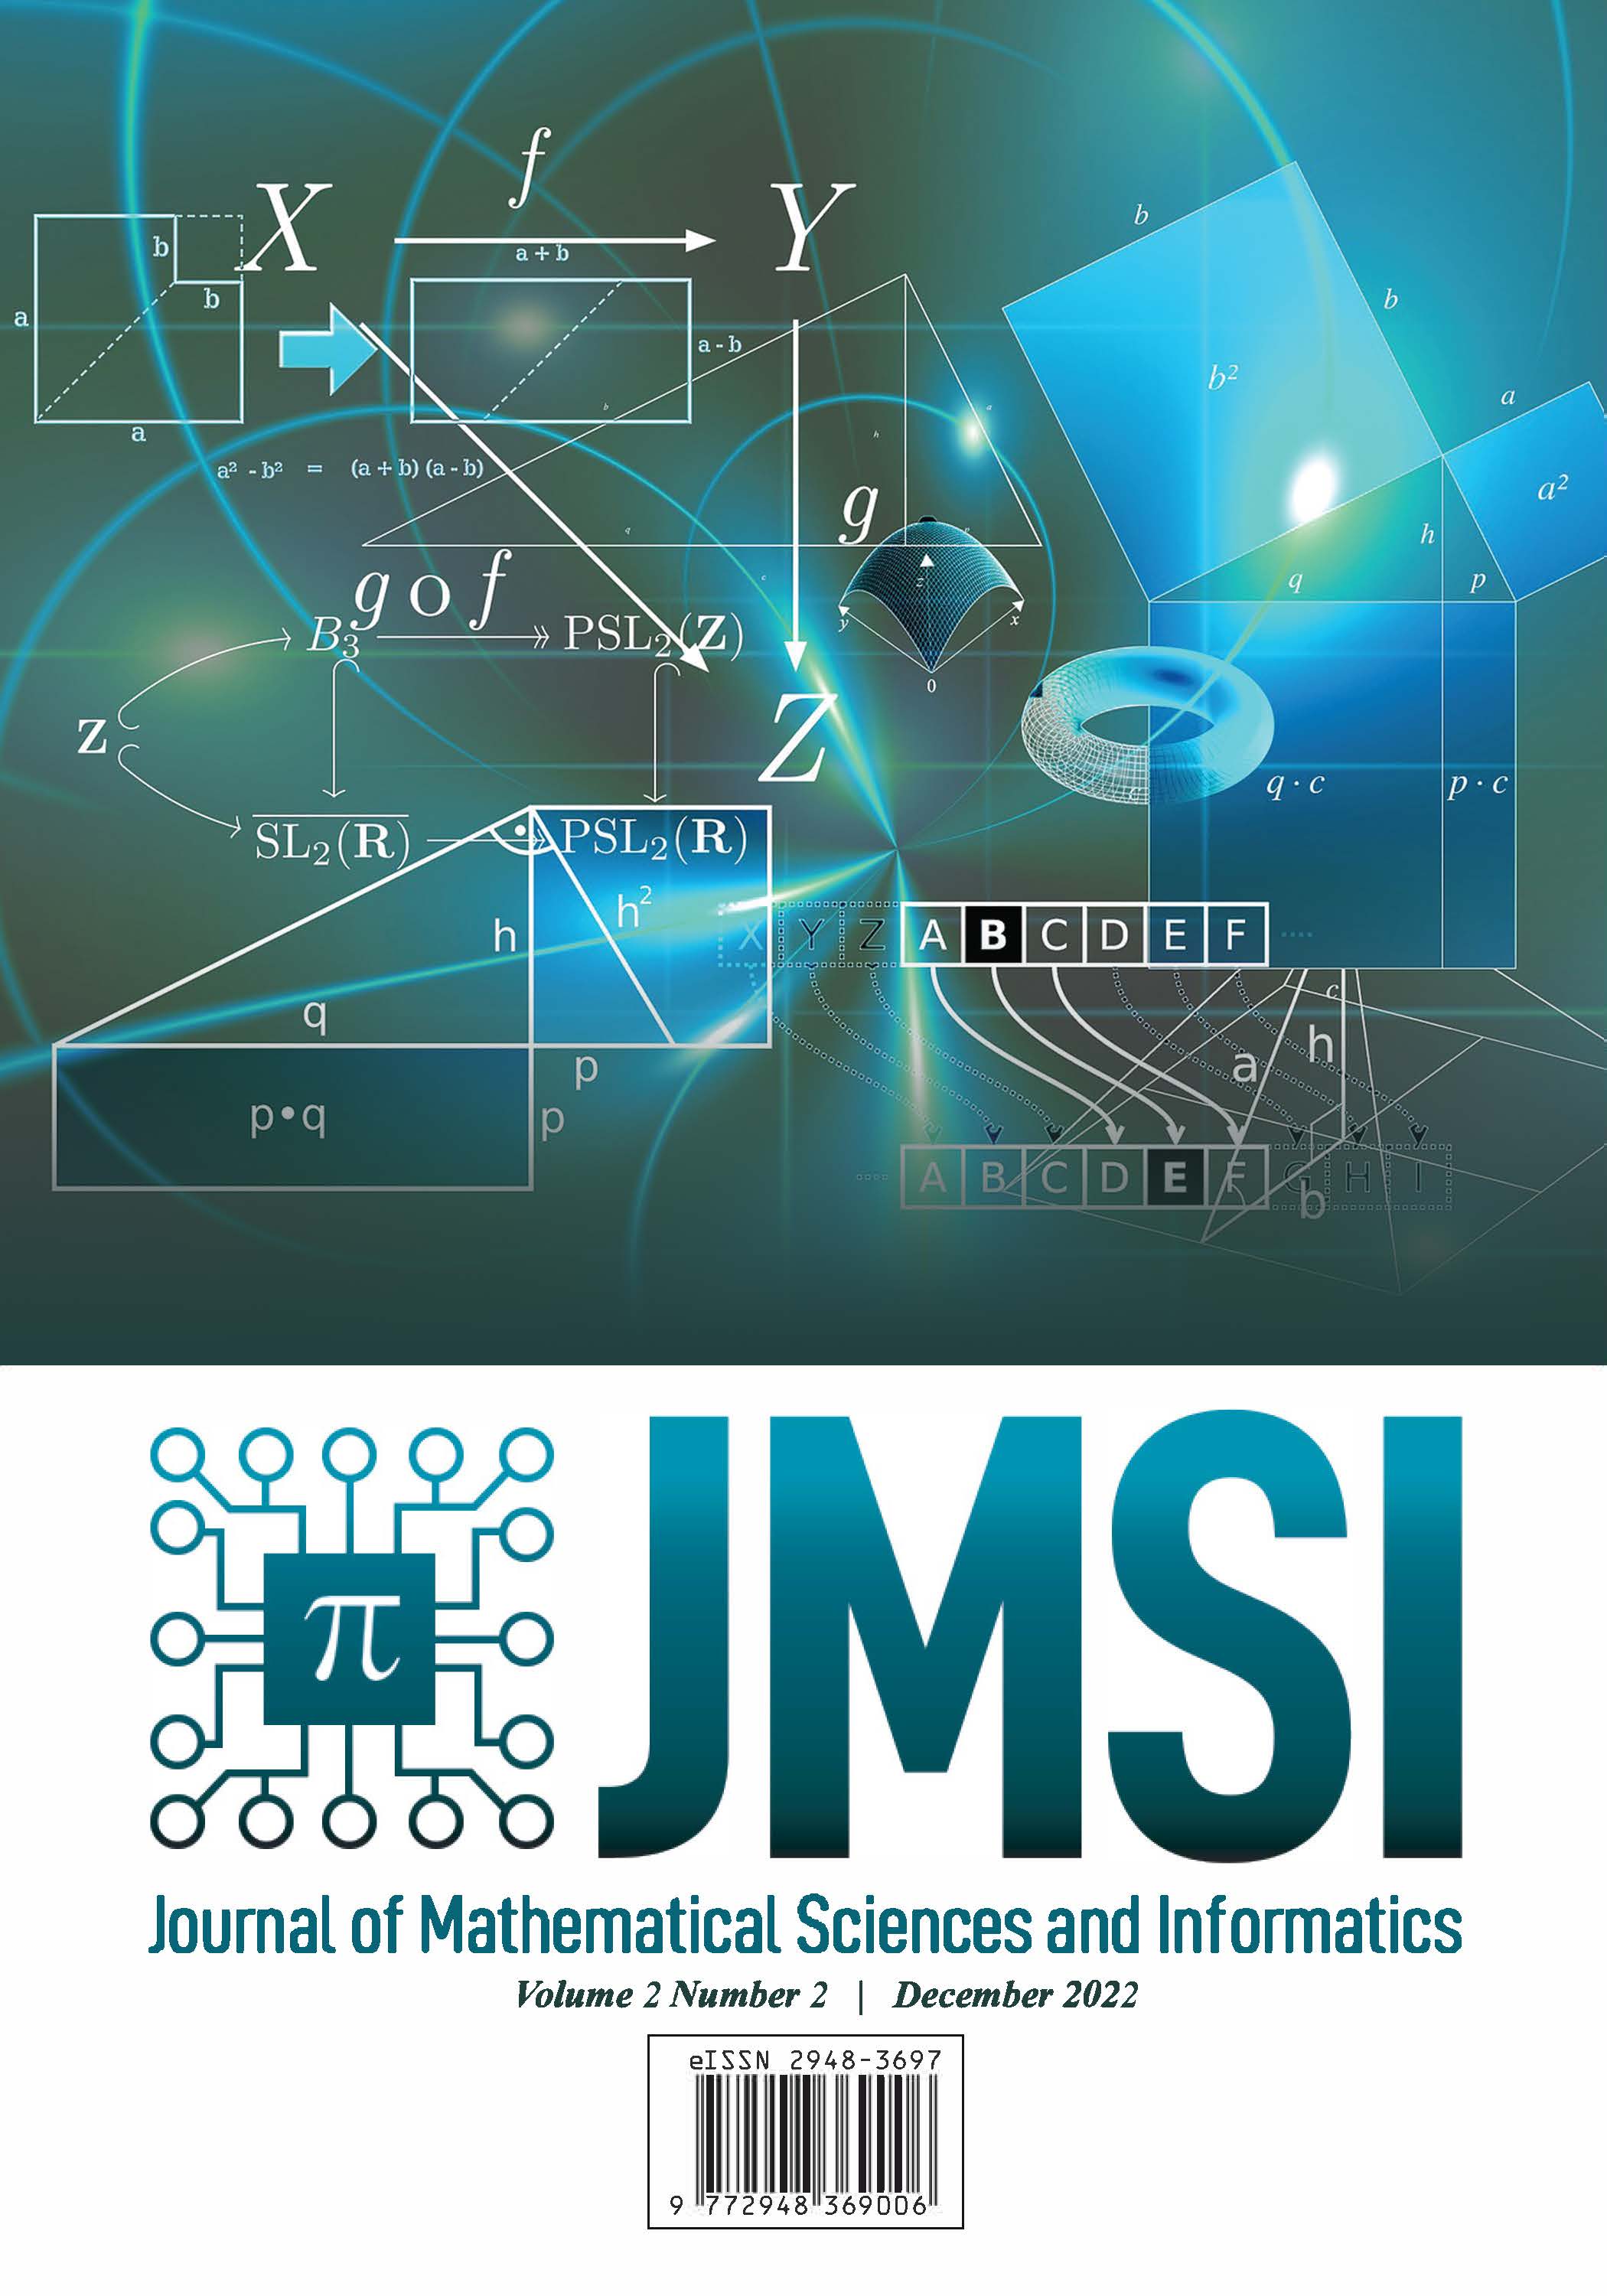 					View Vol. 2 No. 2: Journal of Mathematical Sciences and Informatics, December 2022
				